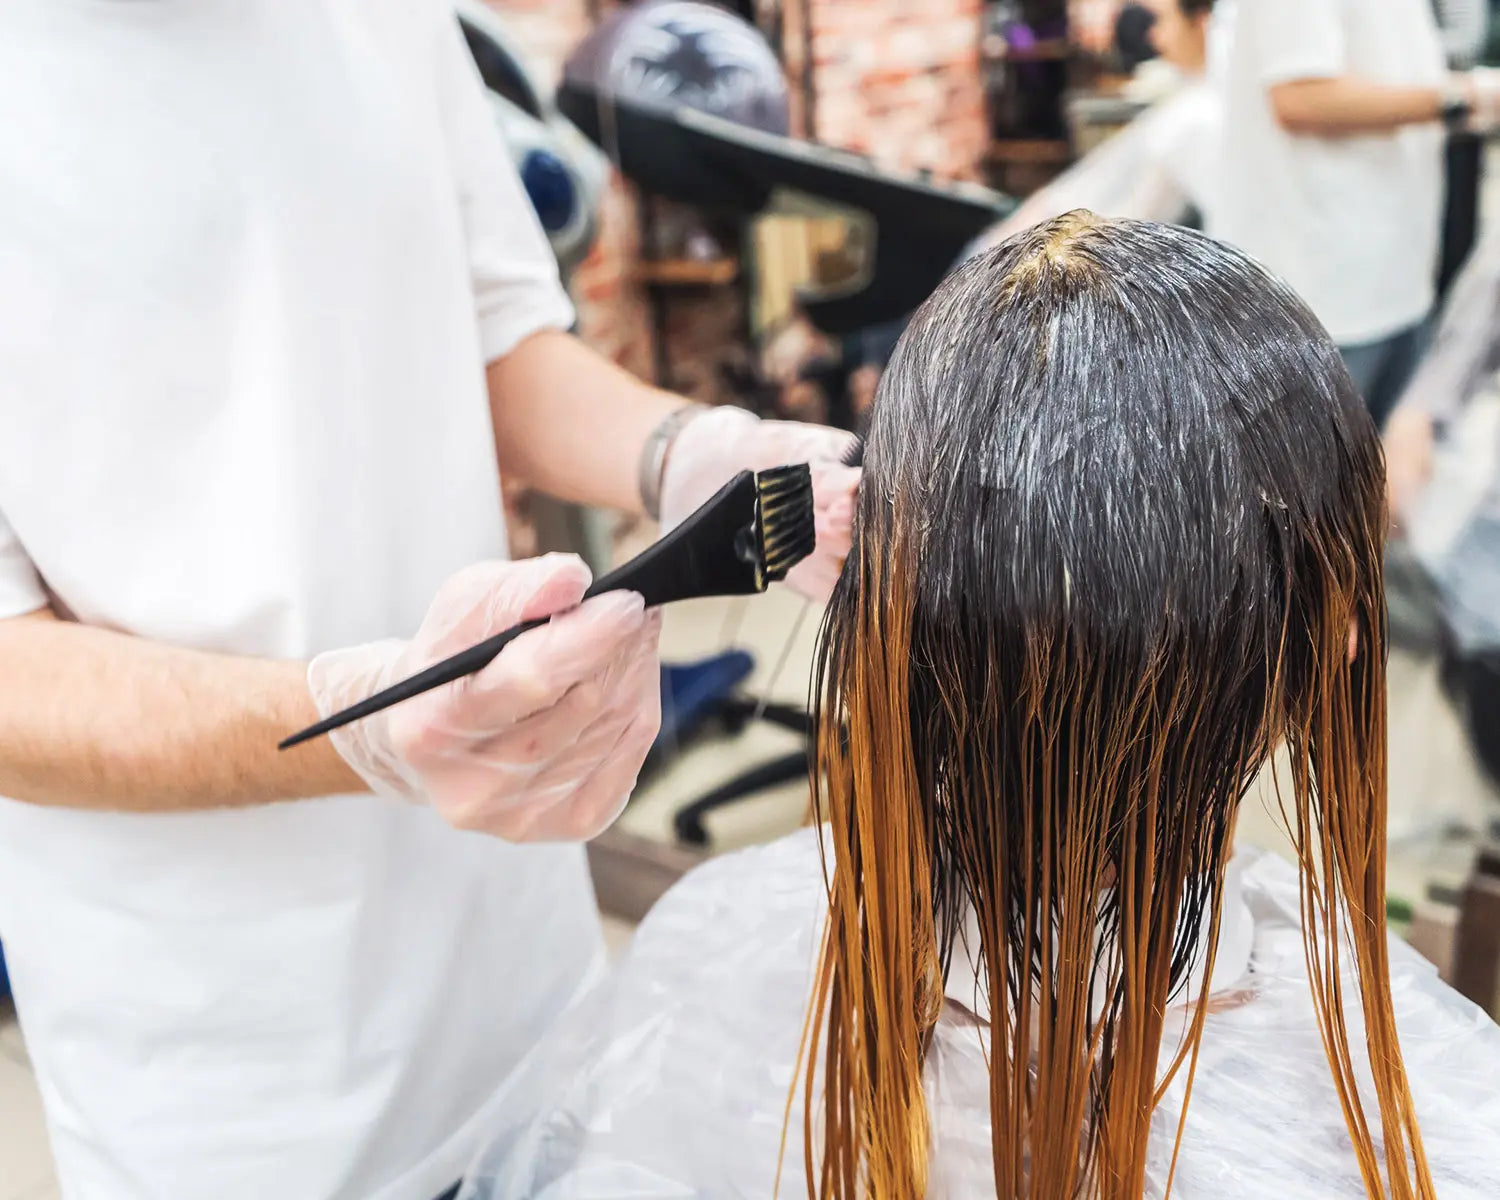 How Often Can You Dye Your Hair Safely?